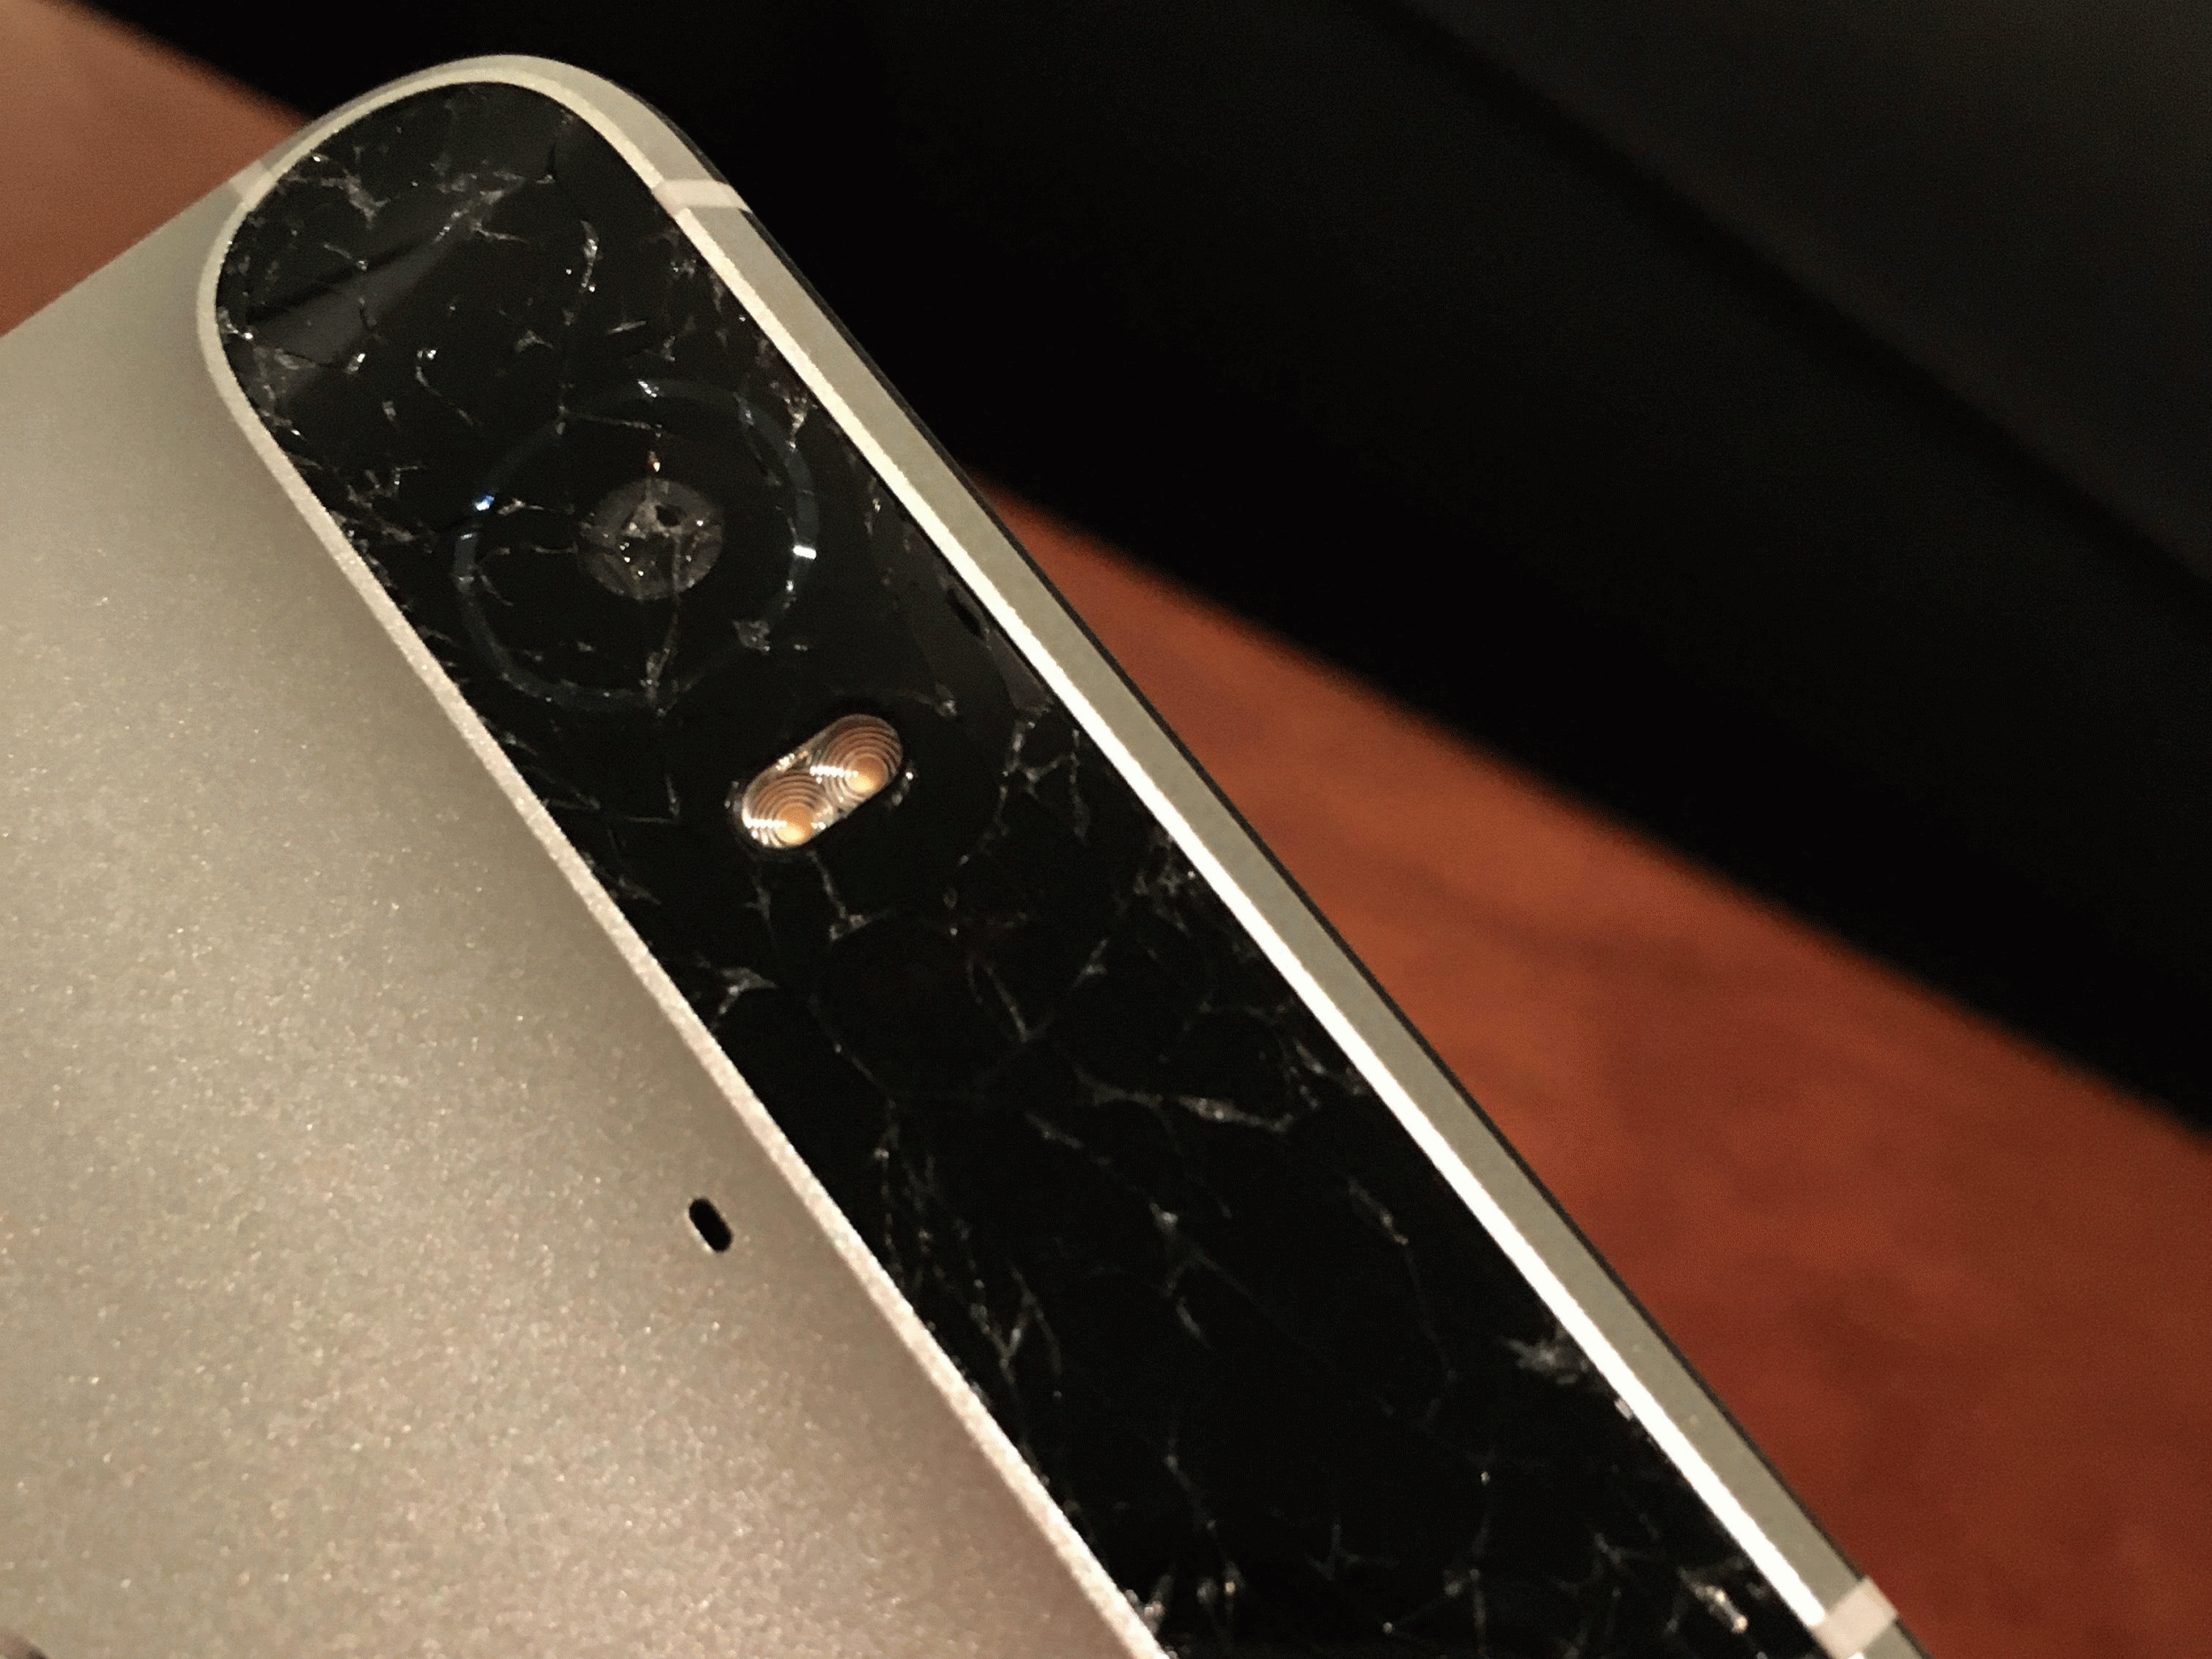 It's not clear how many users have been affected by the glass cracking